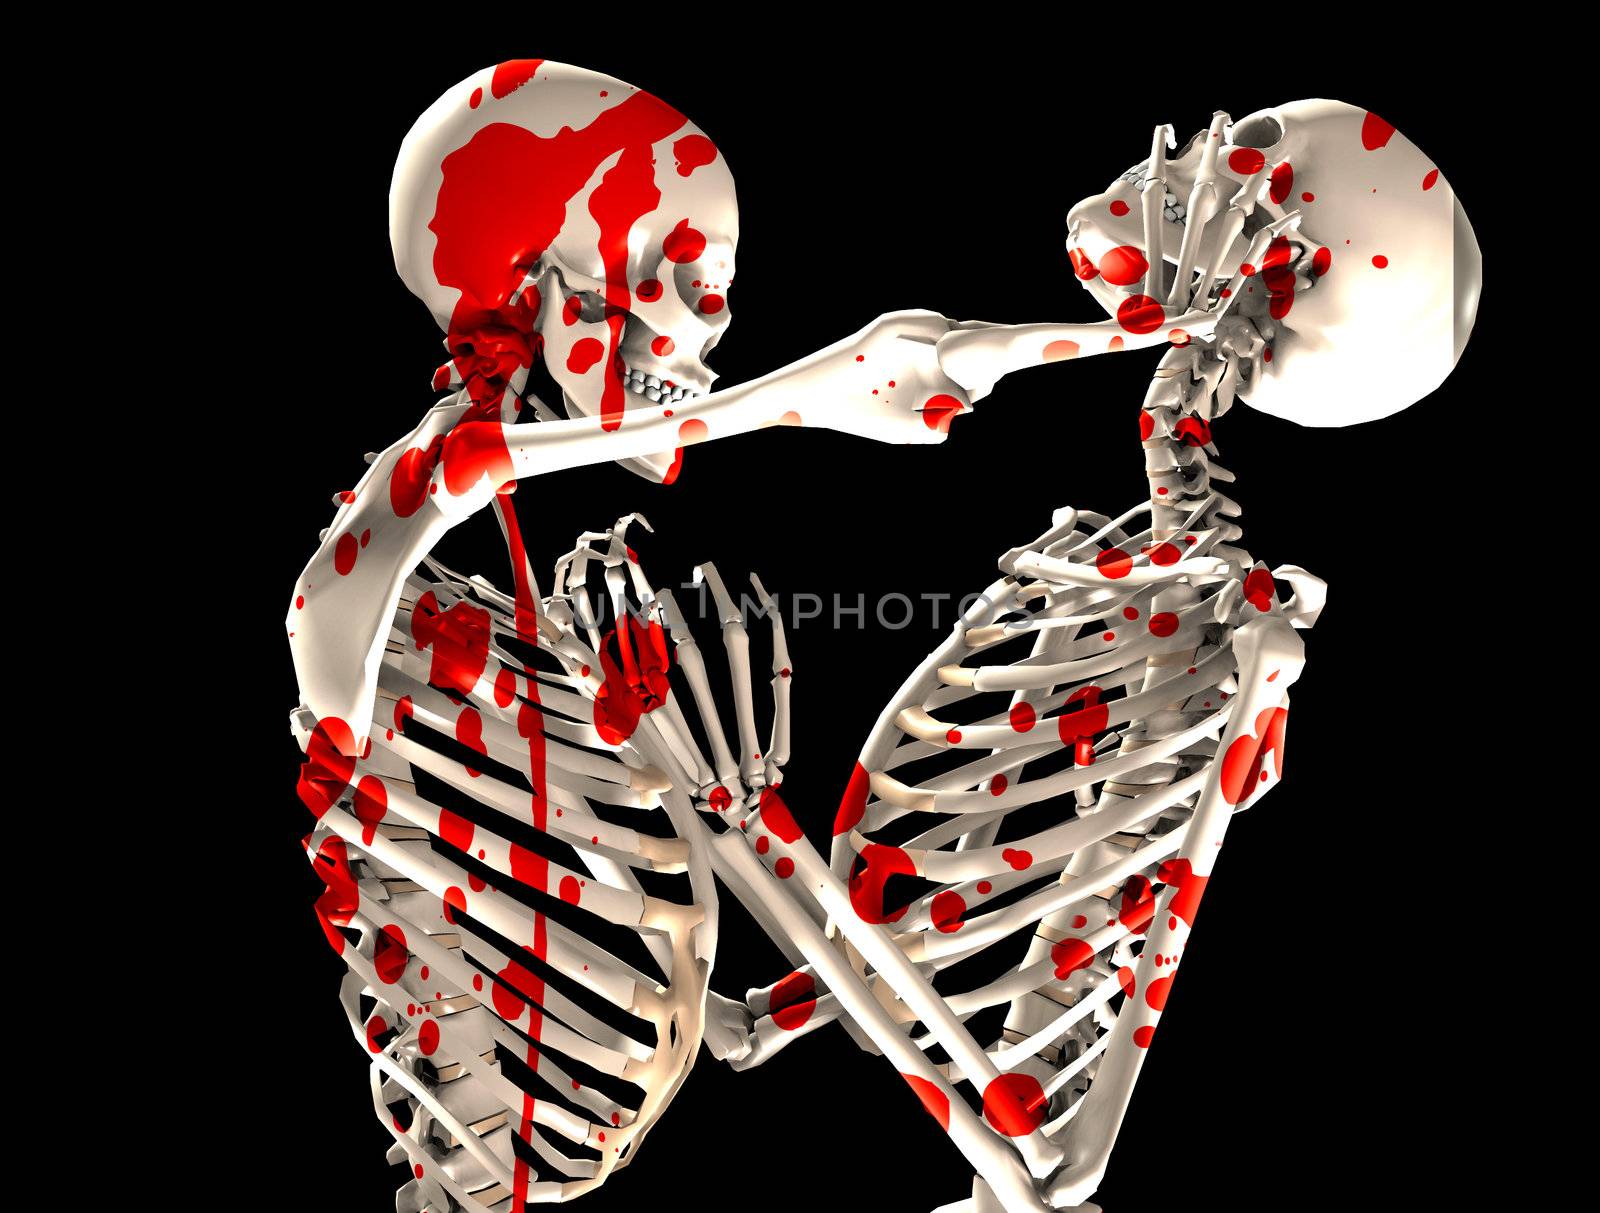 Pair of skeletons that are fighting each other covered in blood.